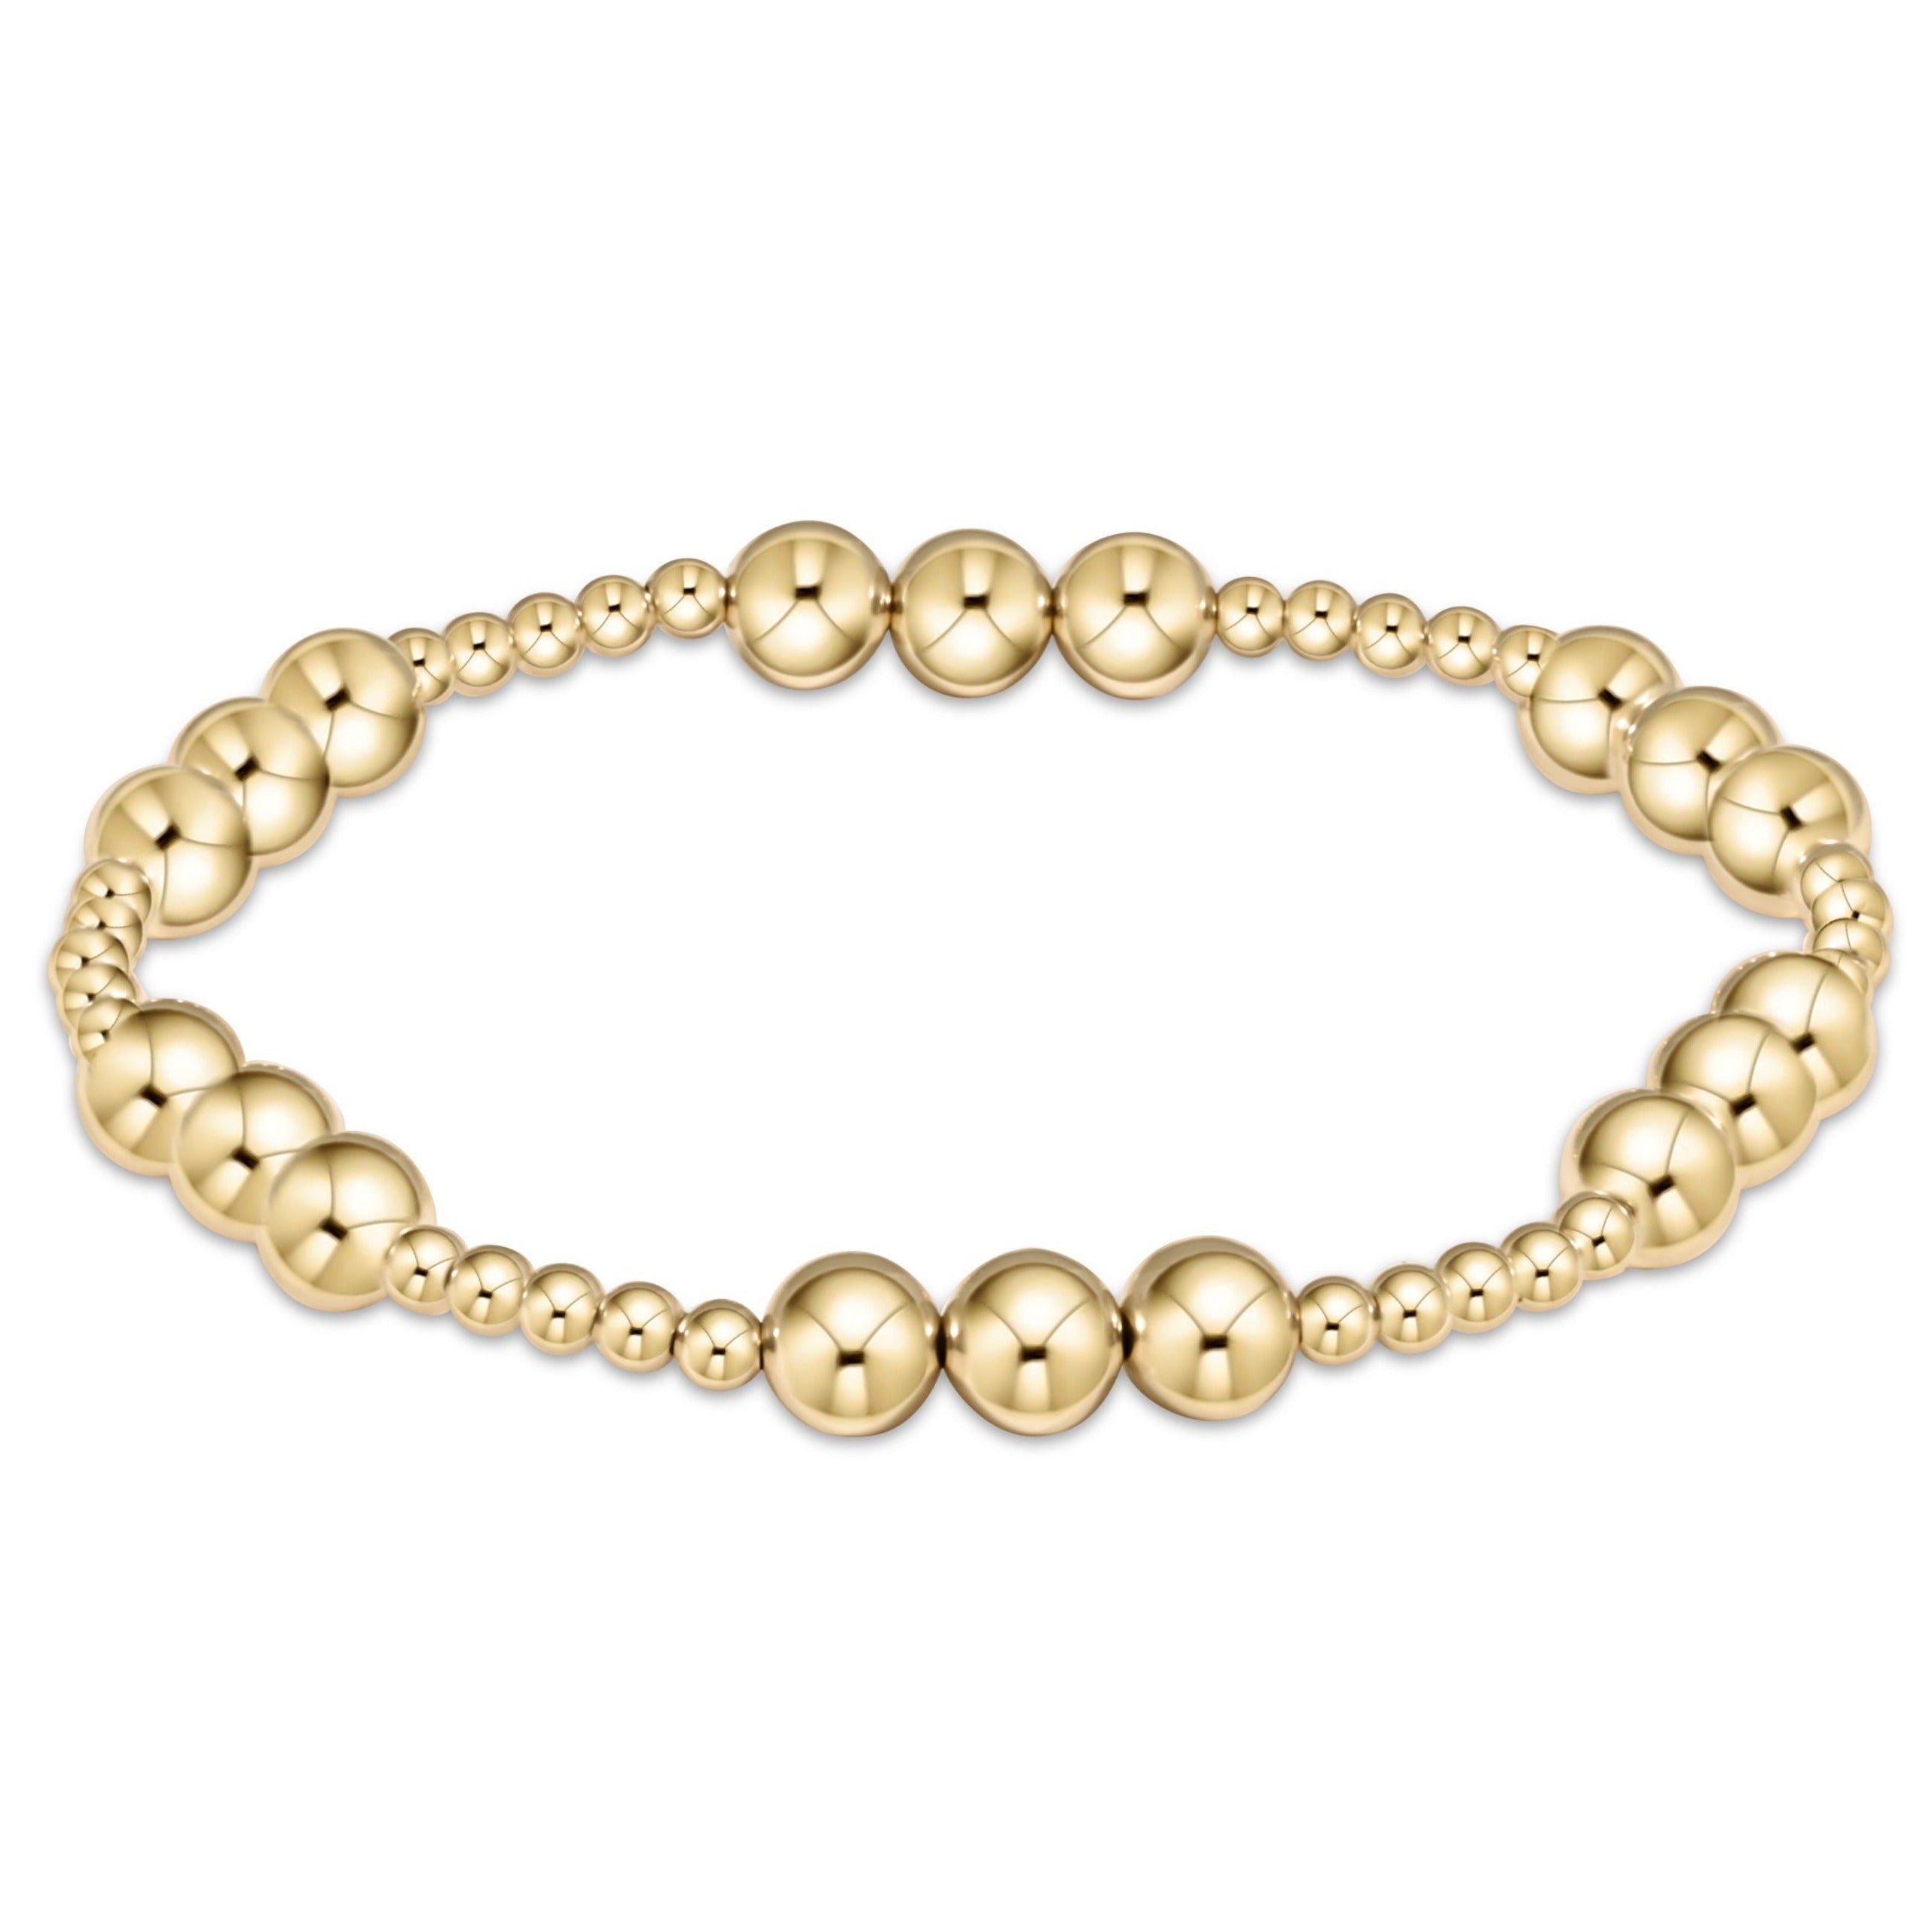 Stunning White, Yellow, and Rose Gold Bracelet - Buy Now – Danson Jewelers